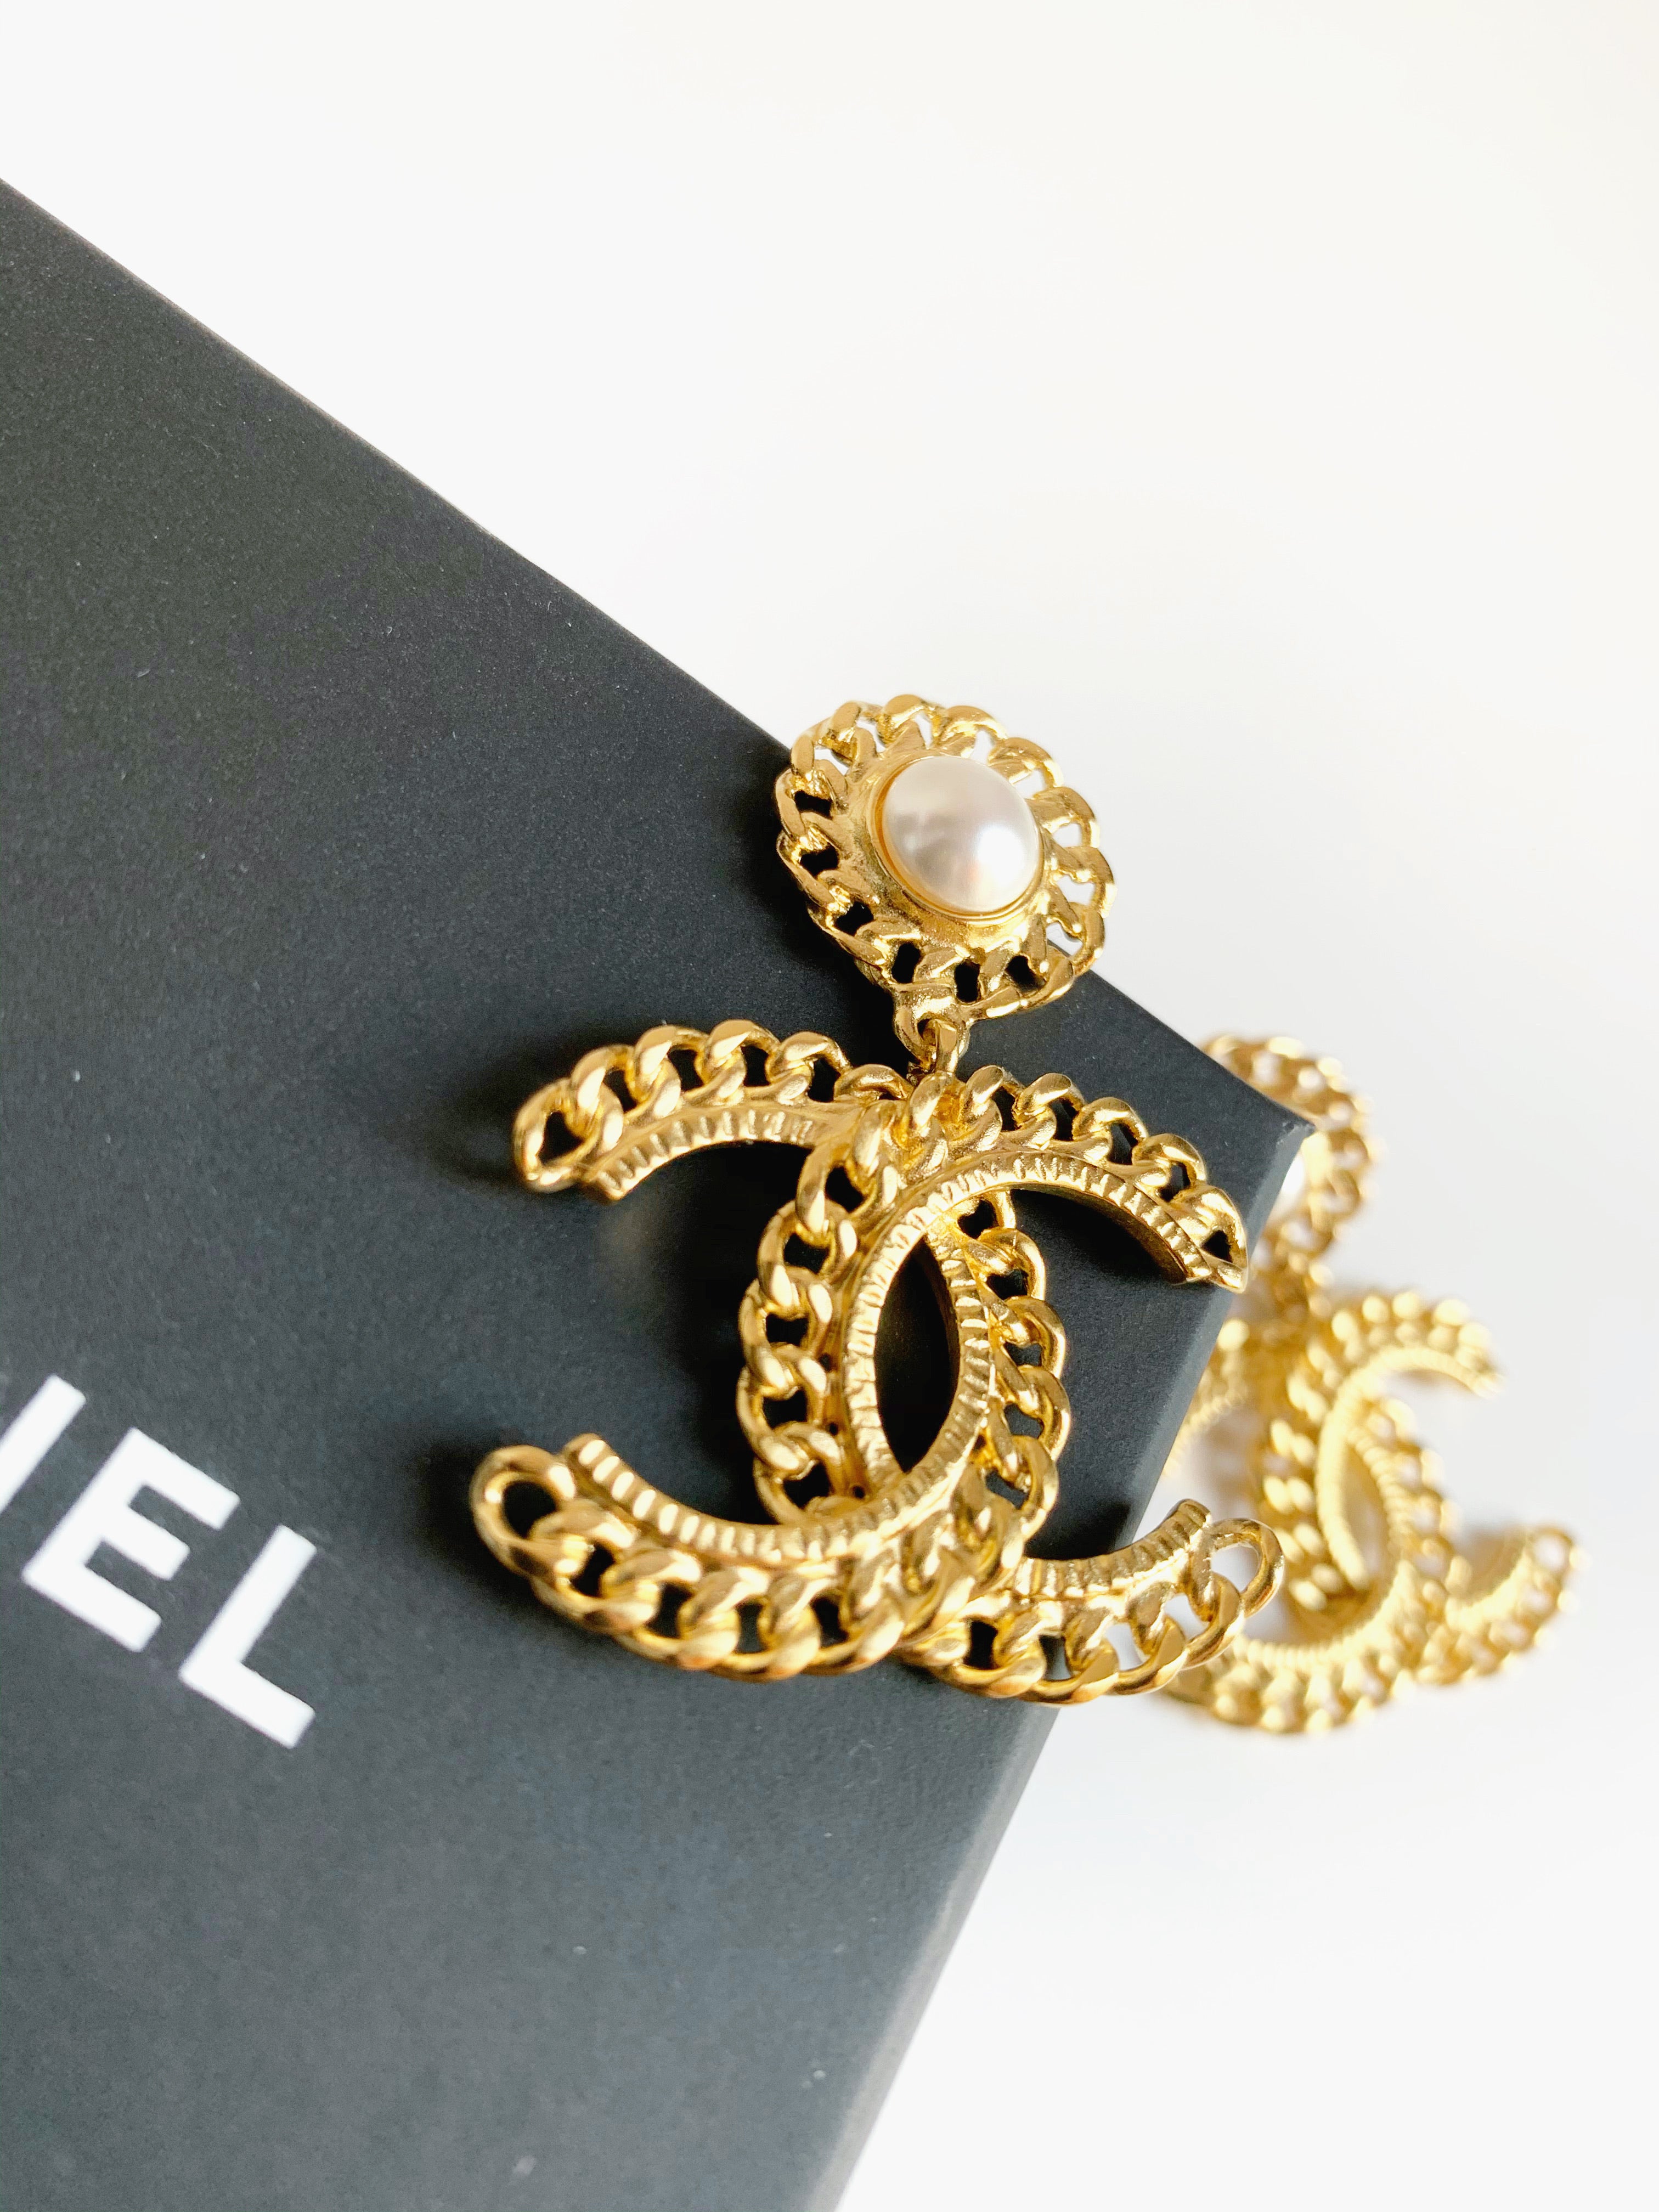 Chanel CC Crystal Earrings Gold Tone 23S – Coco Approved Studio